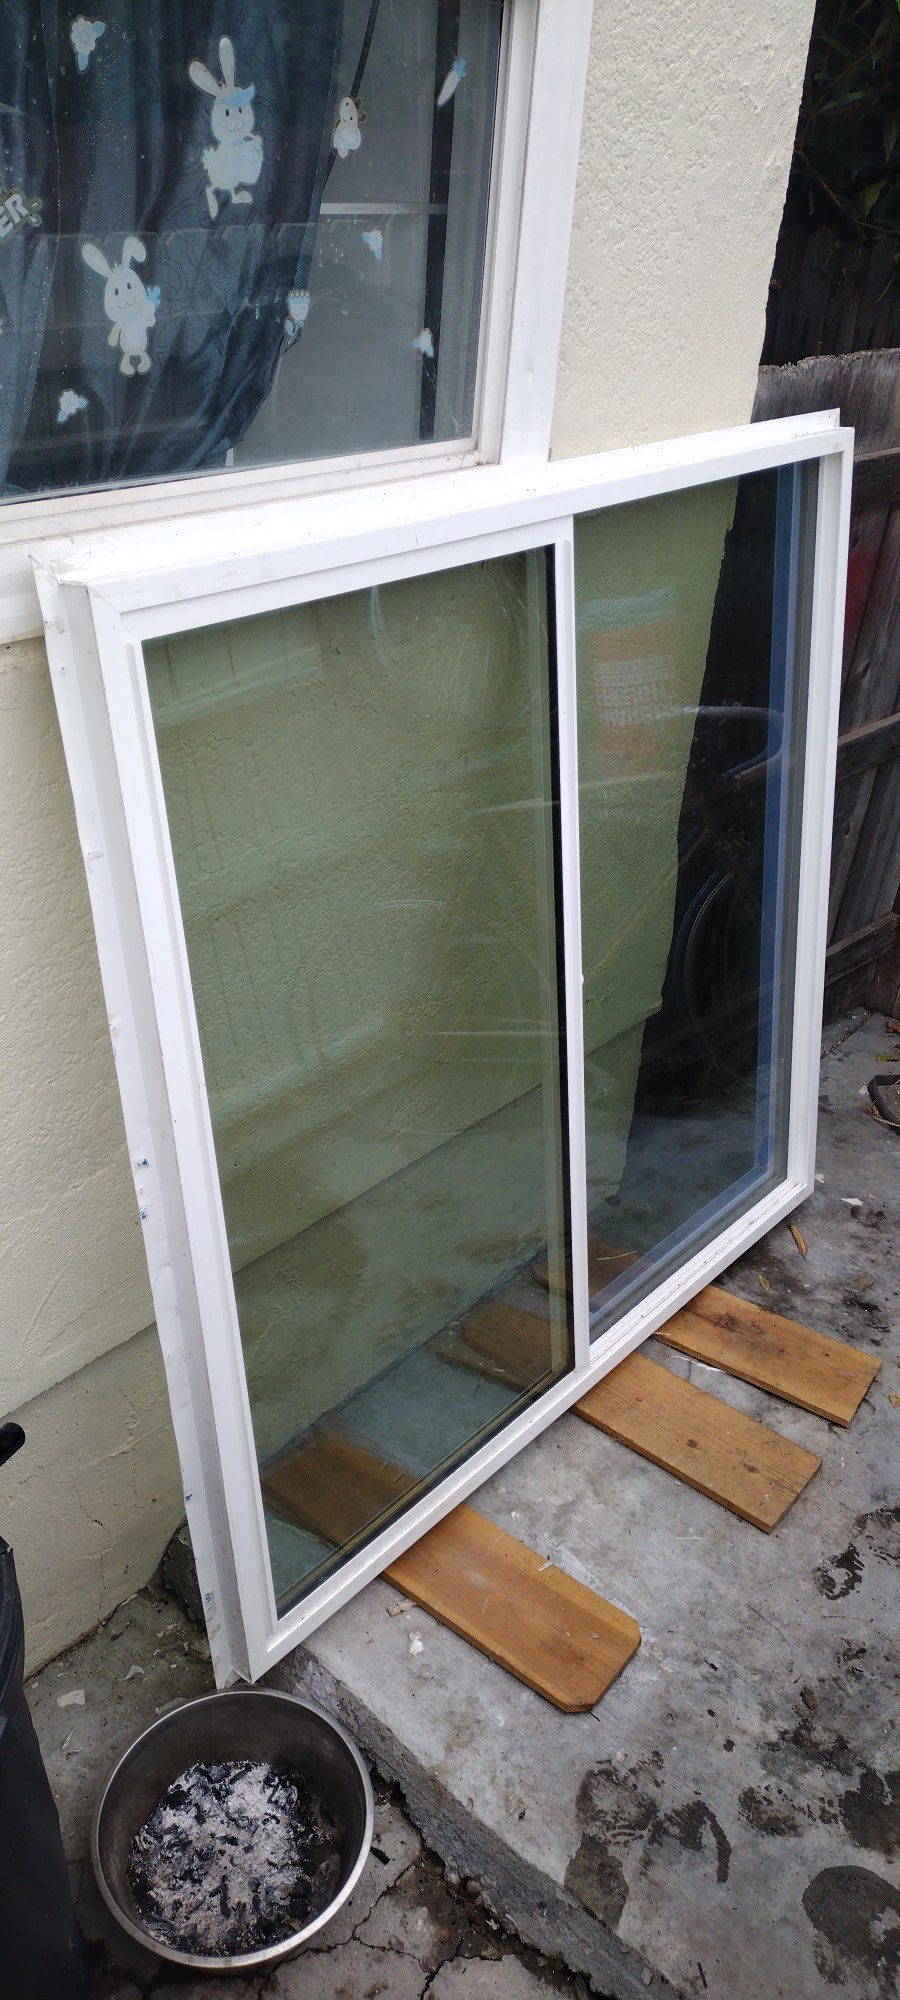 Is Sliding Window For Sale Used In Good Condition The Size Is 5 Footers By 6 Footers